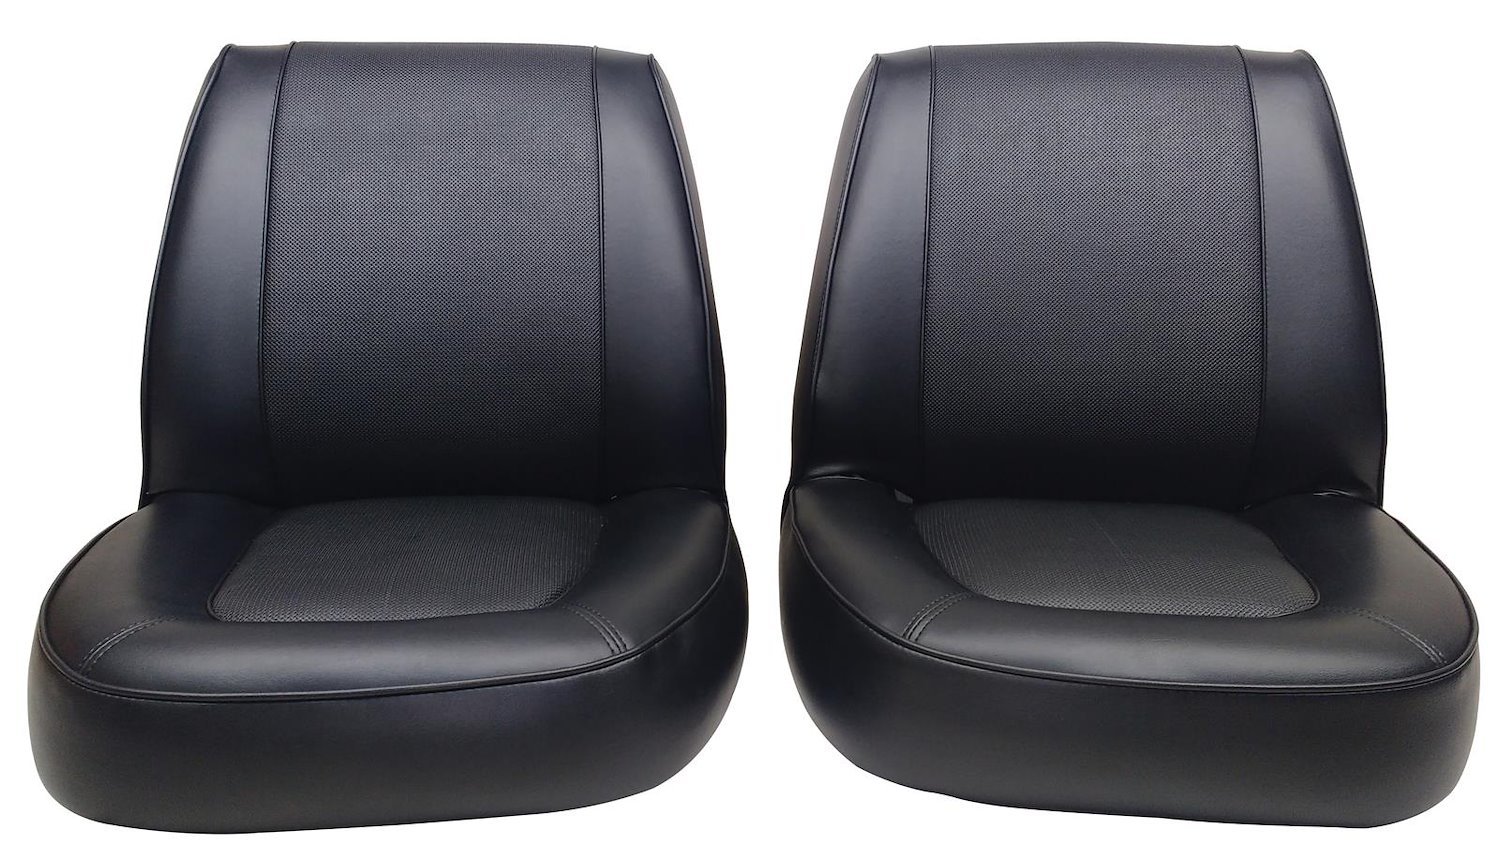 1965 Ford Econoline Falcon Deluxe Club Wagon Interior Front Bucket Seat Upholsterty Set